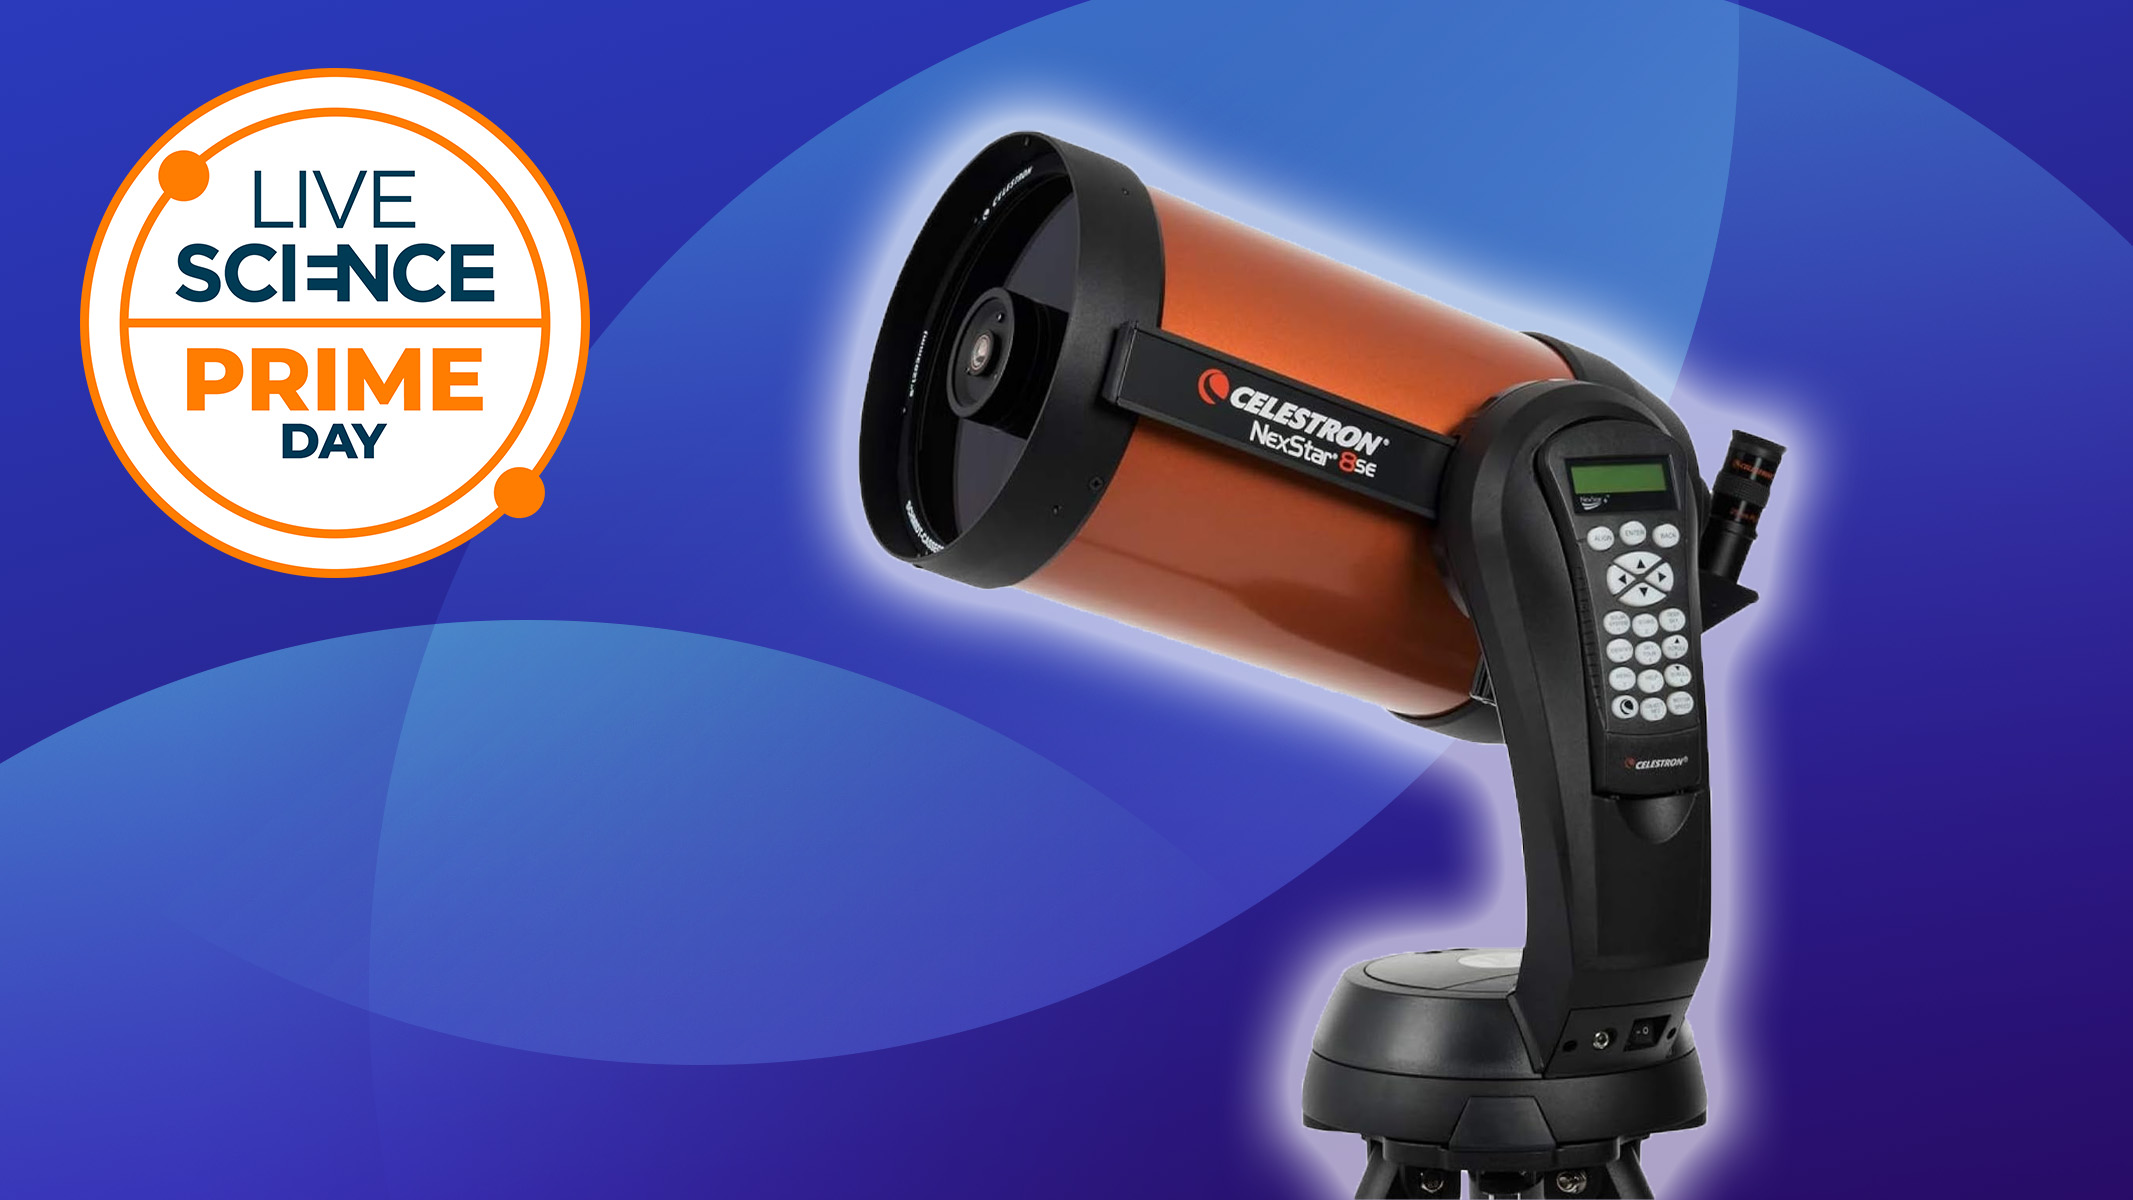  Save $200 on the Celestron NexStar 8SE in this Prime Day telescope deal 